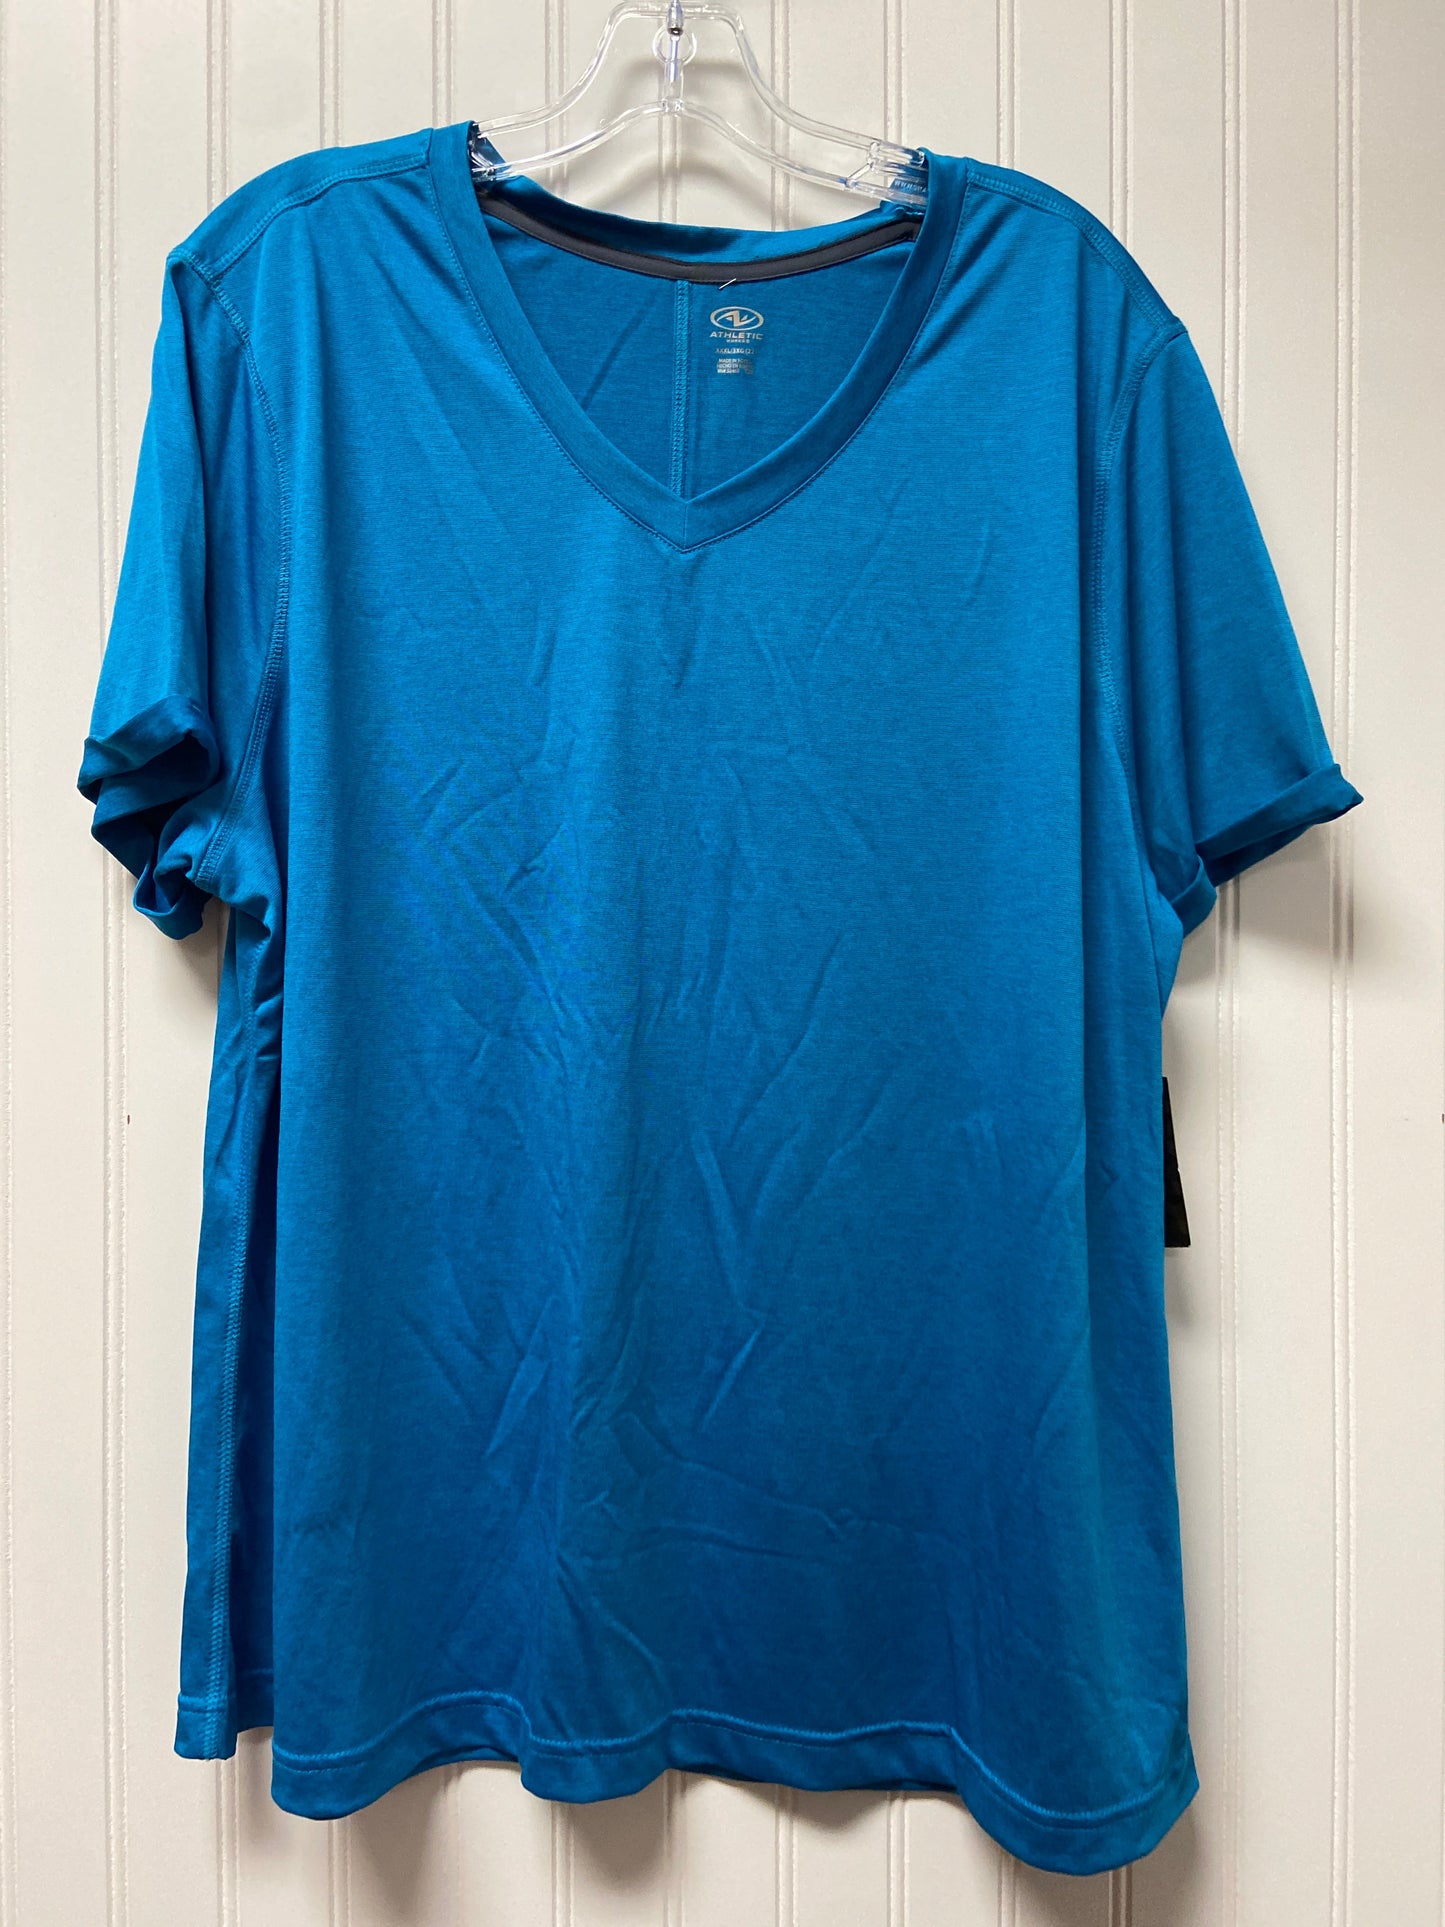 Blue Athletic Top Short Sleeve Athletic Works, Size 3x